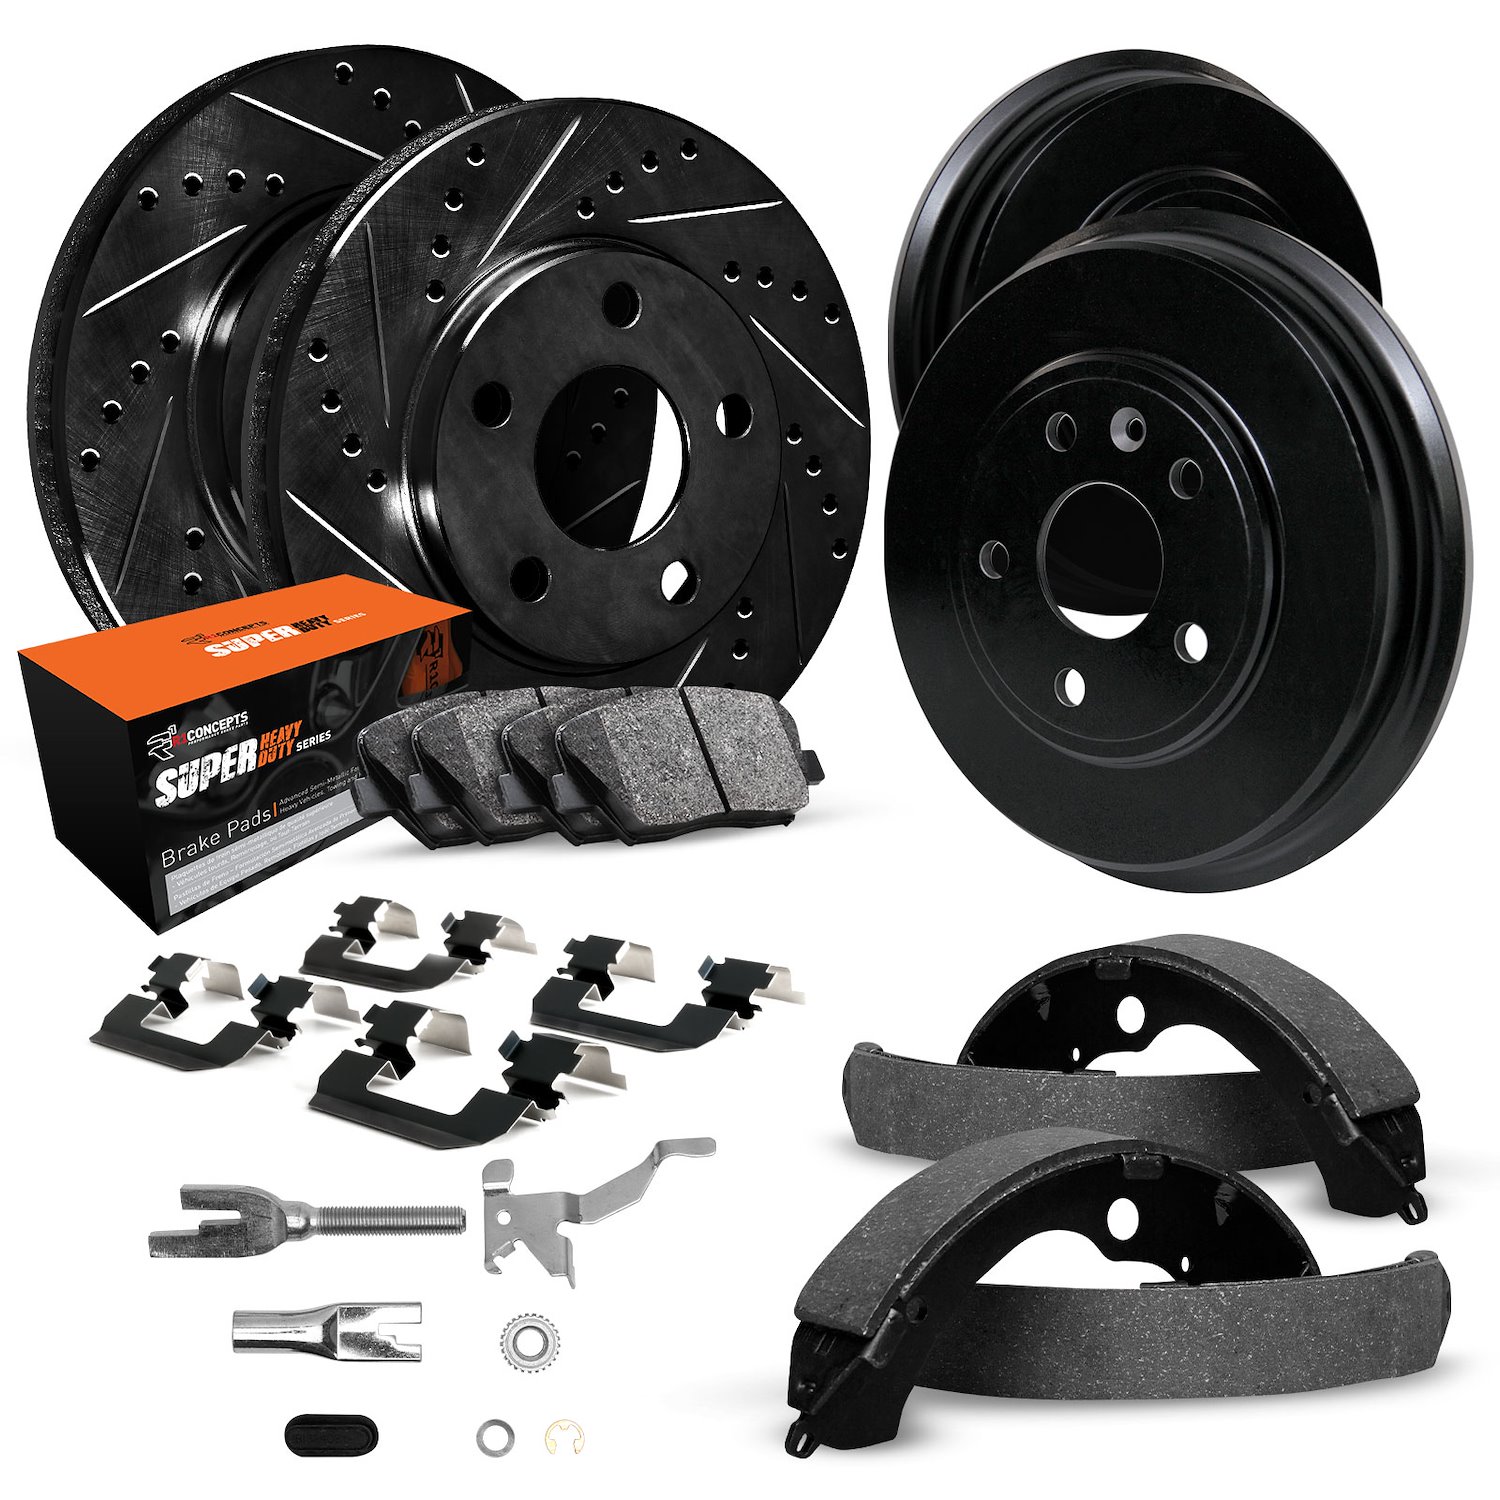 E-Line Drilled/Slotted Black Rotor & Drum Set w/Super-Duty Pads, Shoes, Hardware/Adjusters, 2007-2007 GM